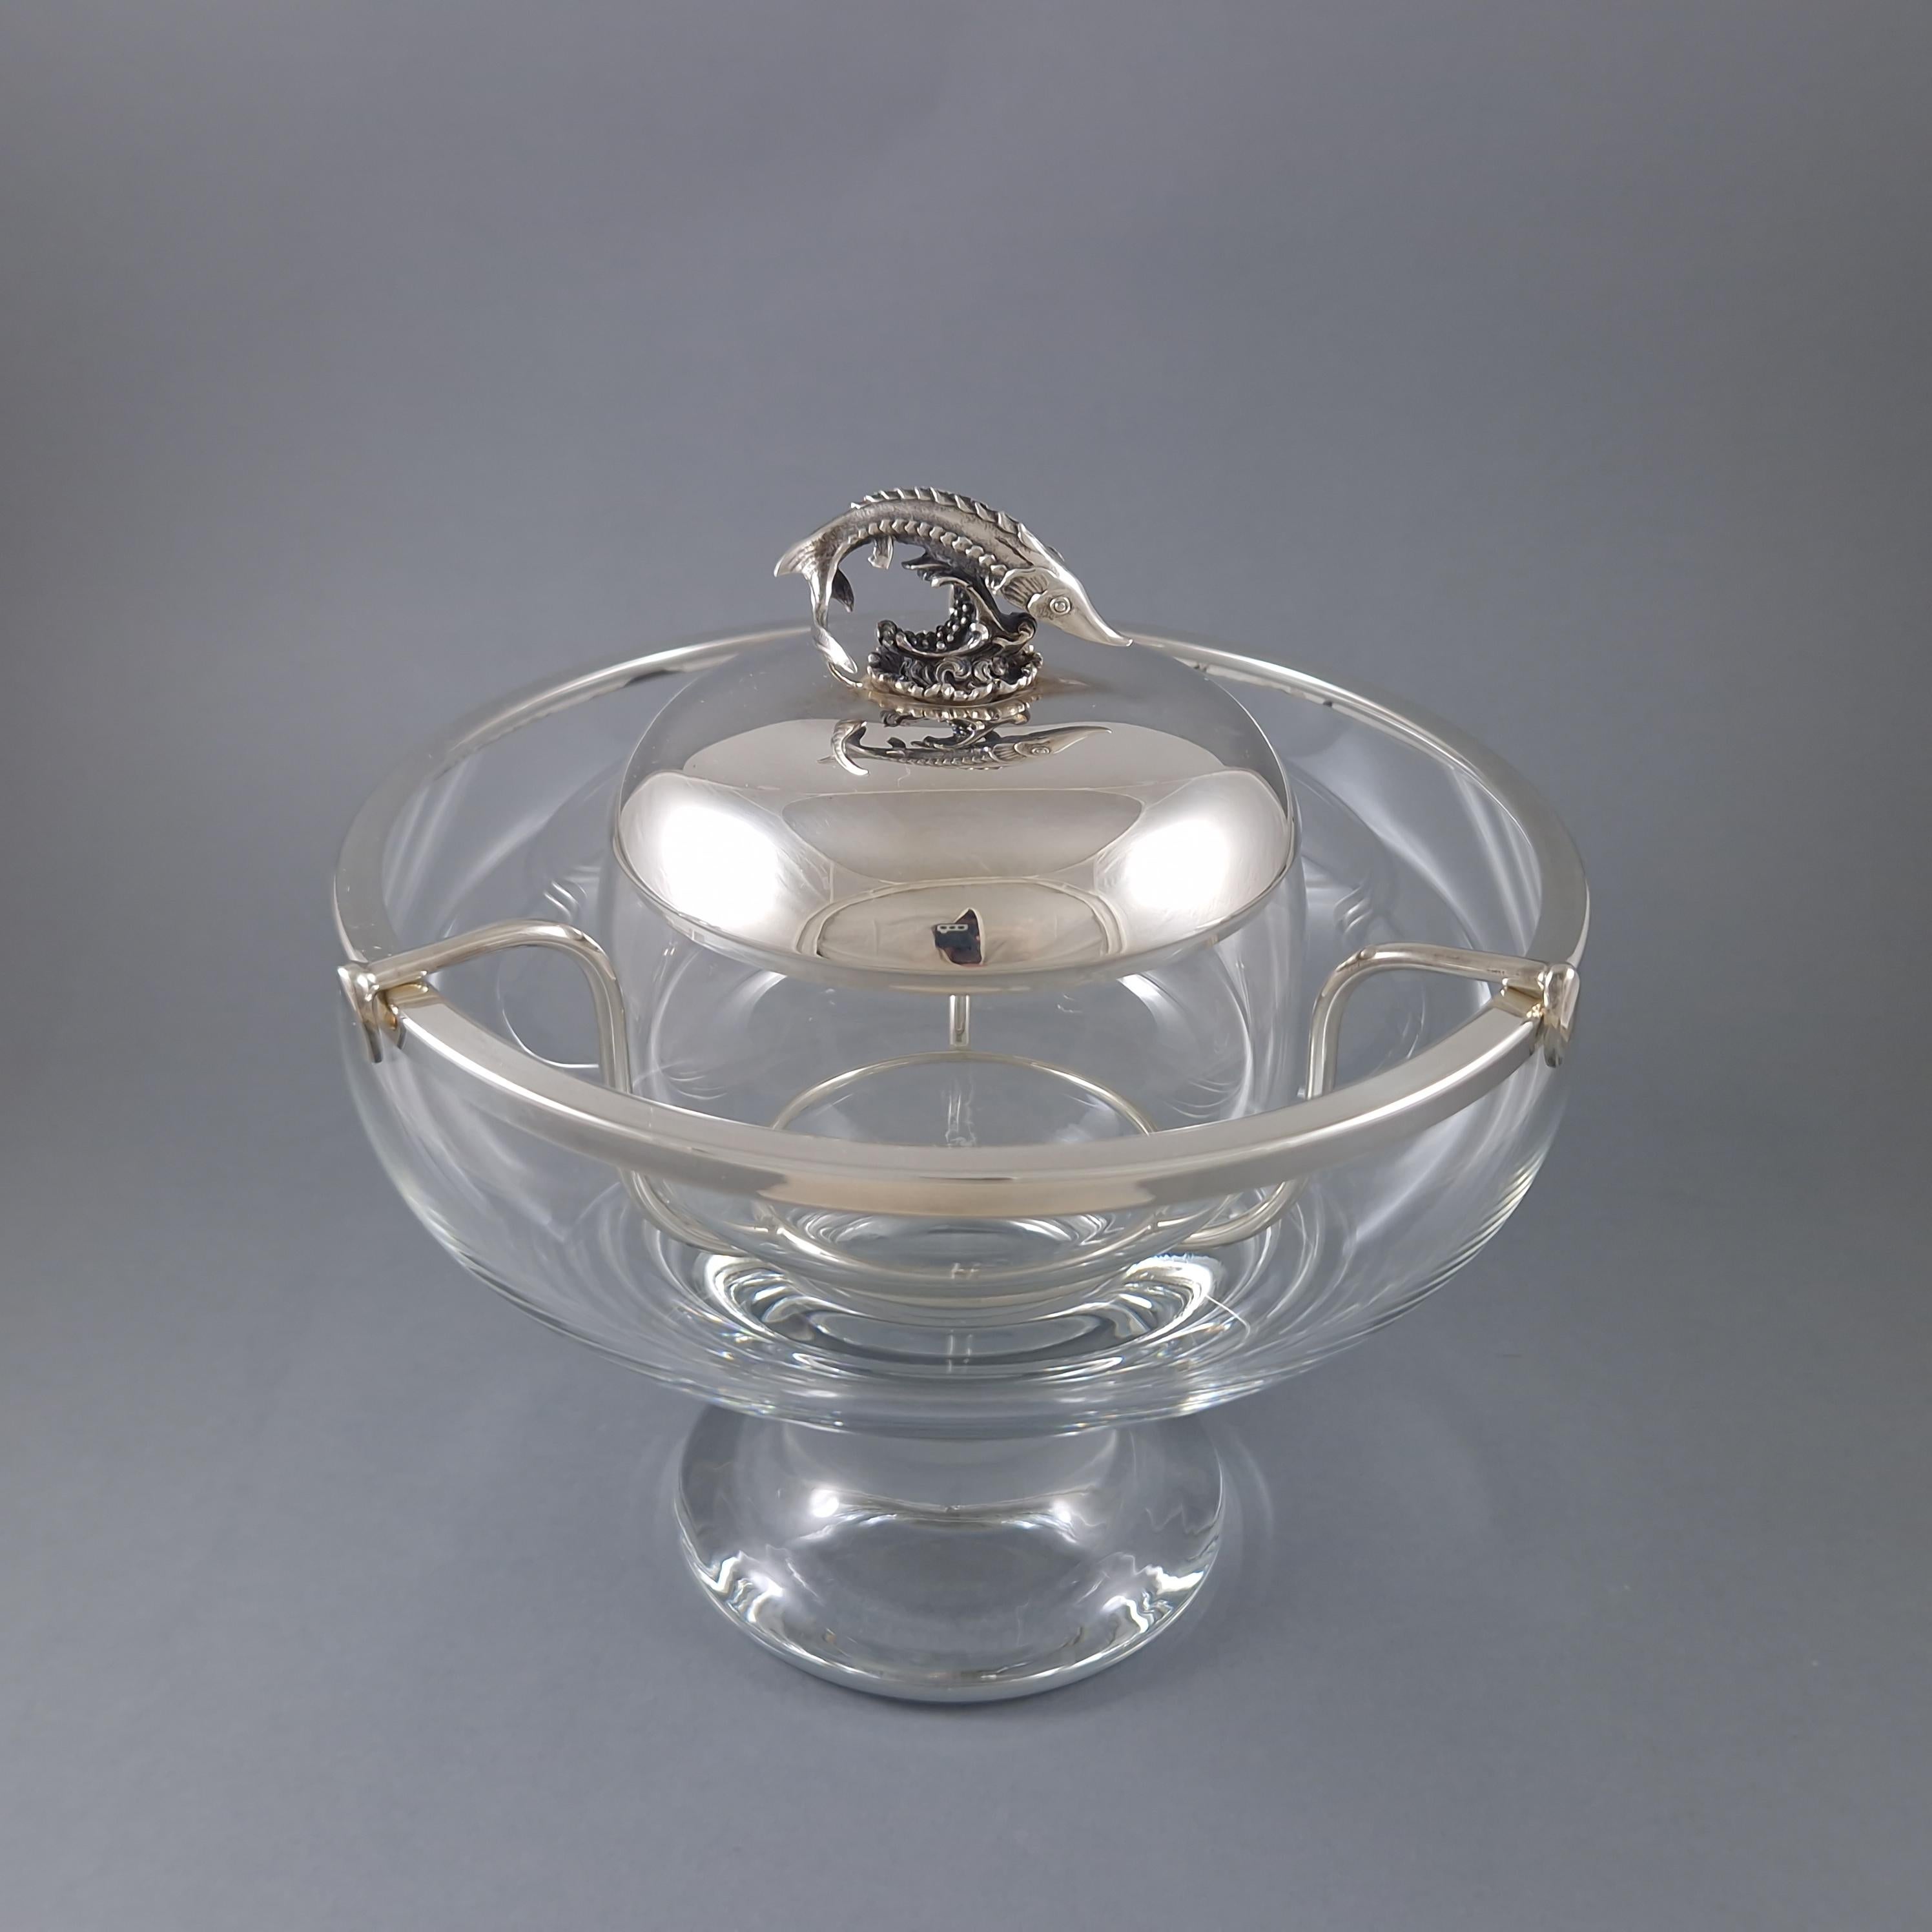 Caviar bowl in glass and sterling silver decor with a sturgeon 
925 silver hallmark 
Total height: 17.3 cm 
Height of the bowl: 12.3 cm 
Diameter: 17 cm 
Diameter of the inner bowl: 9.4 cm